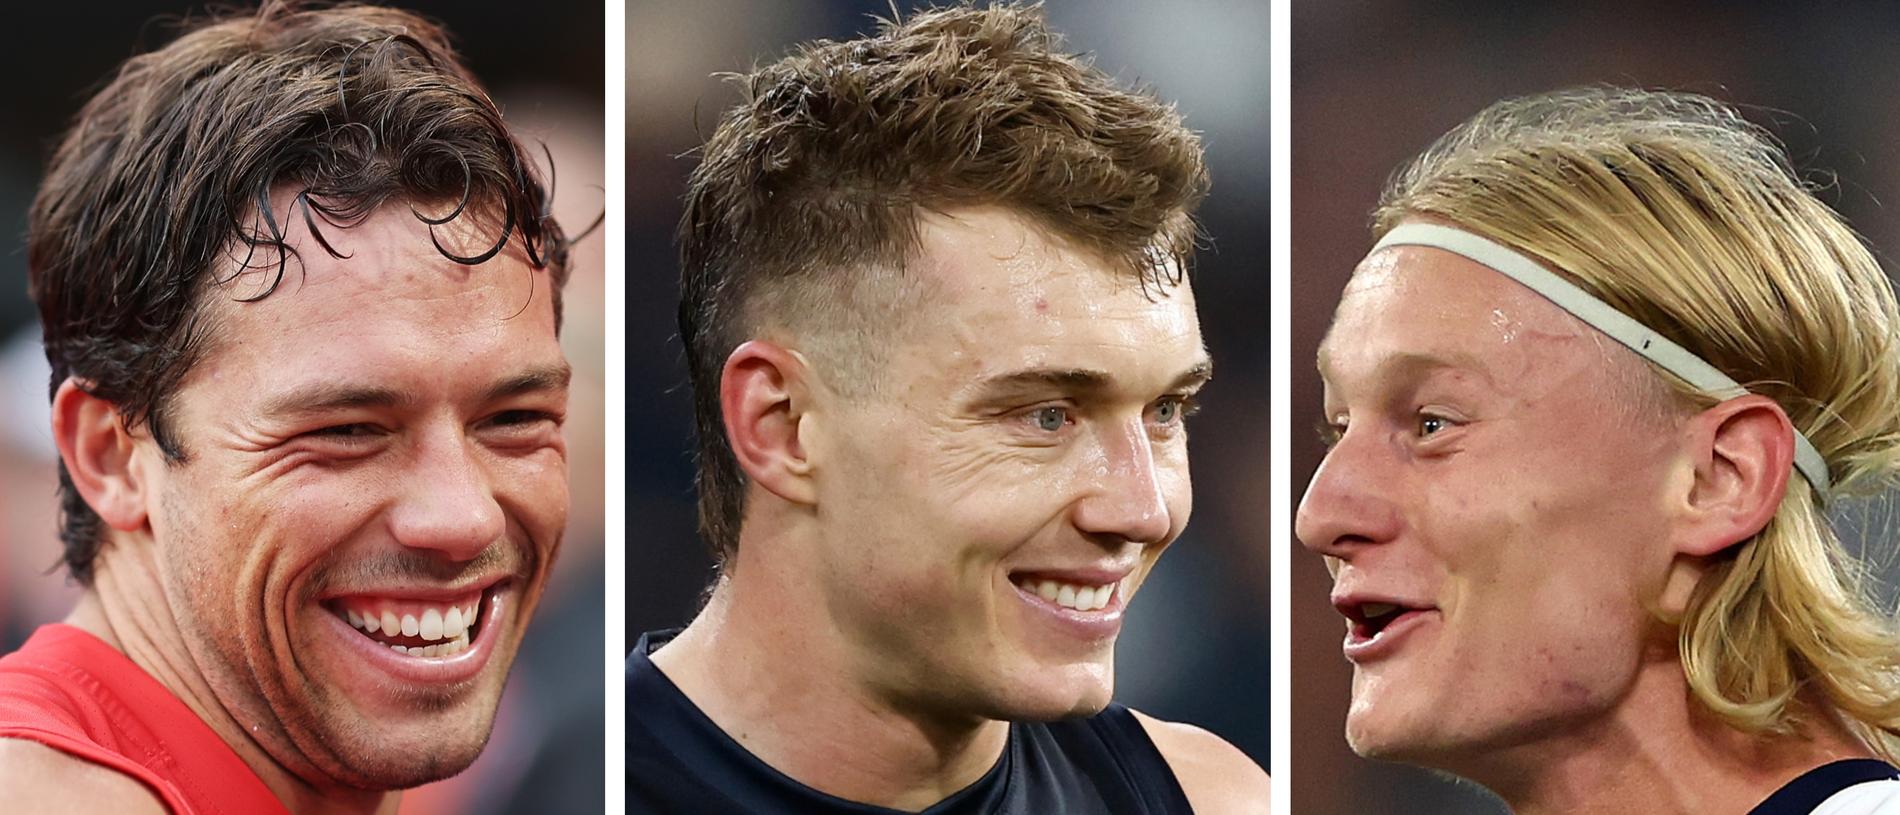 Ollie Florent, Patrick Cripps and Oliver Dempsey